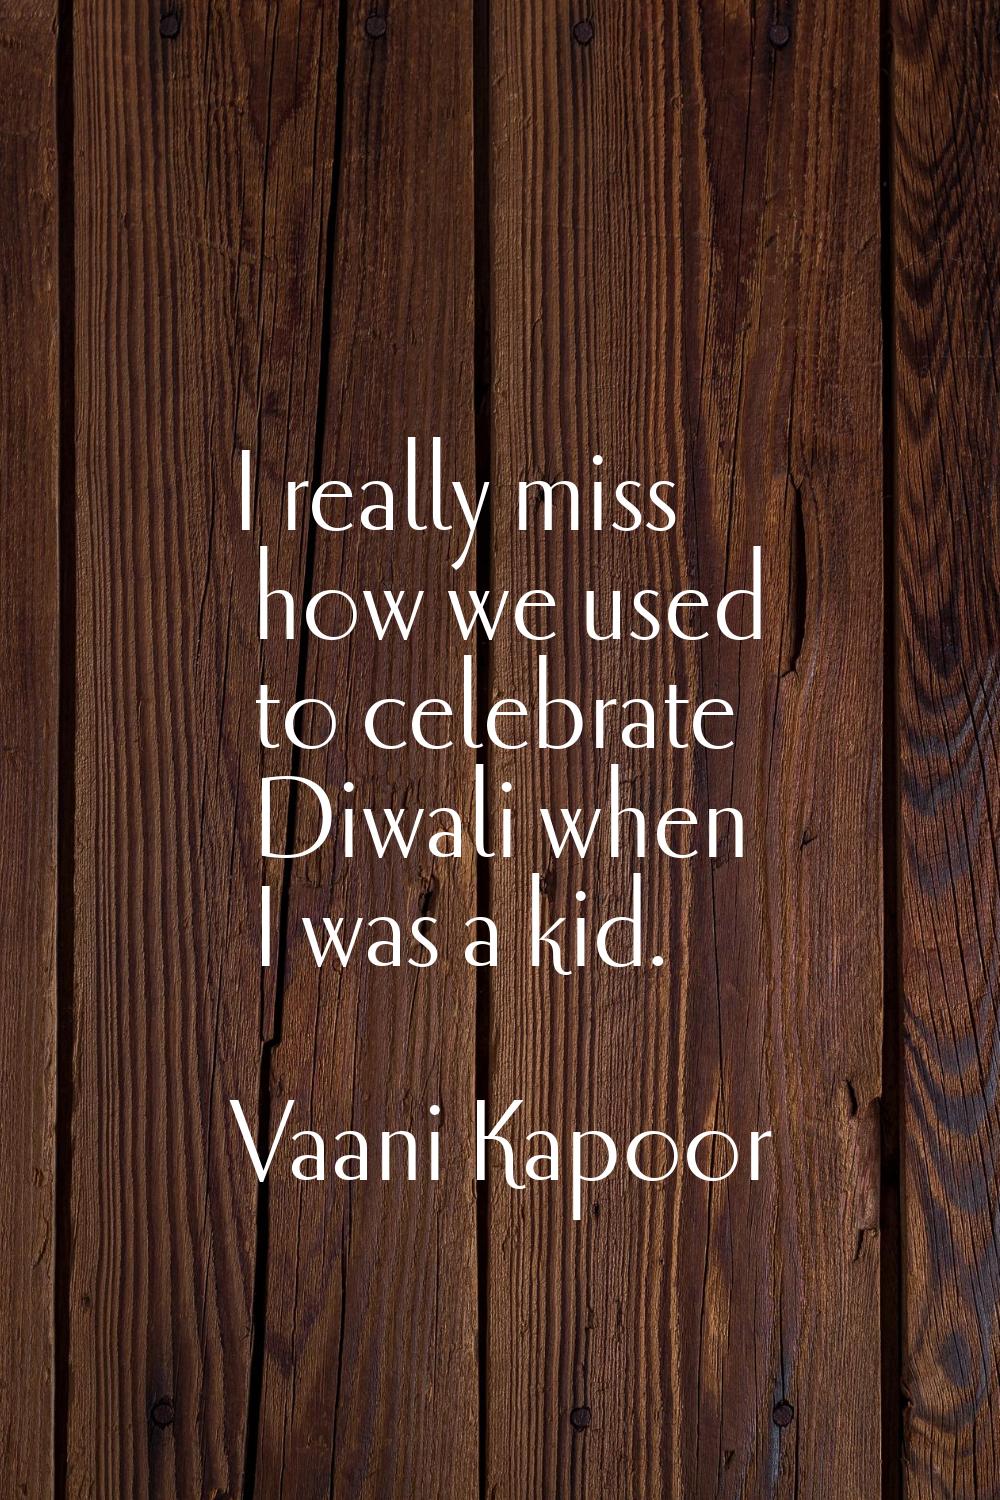 I really miss how we used to celebrate Diwali when I was a kid.